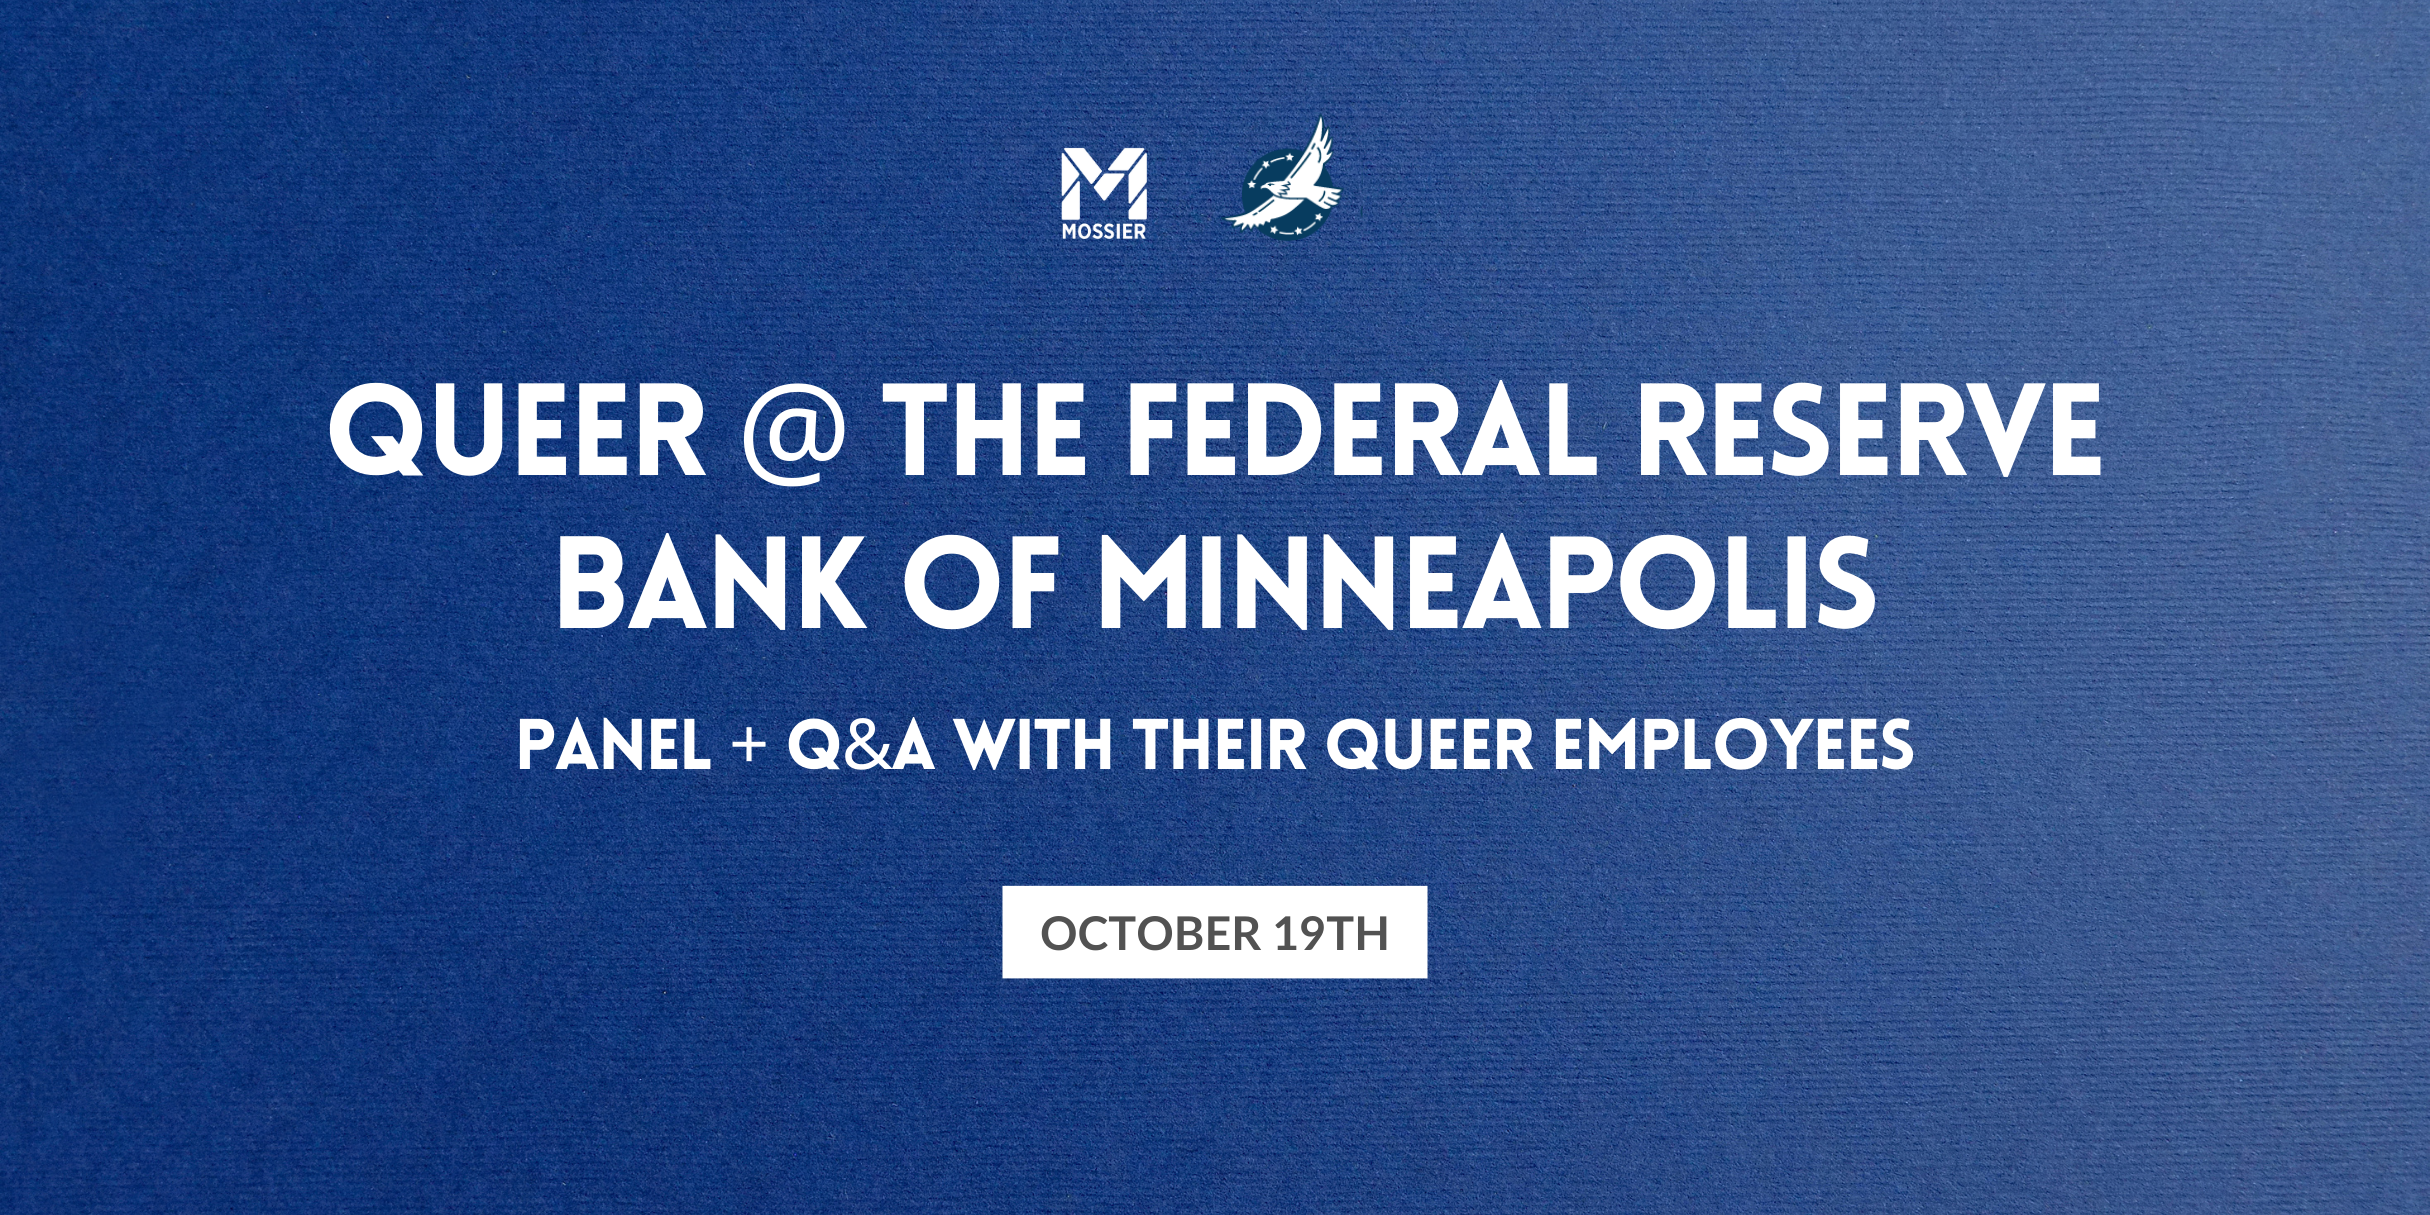 Queer @ The Federal Reserve Bank of Minneapolis